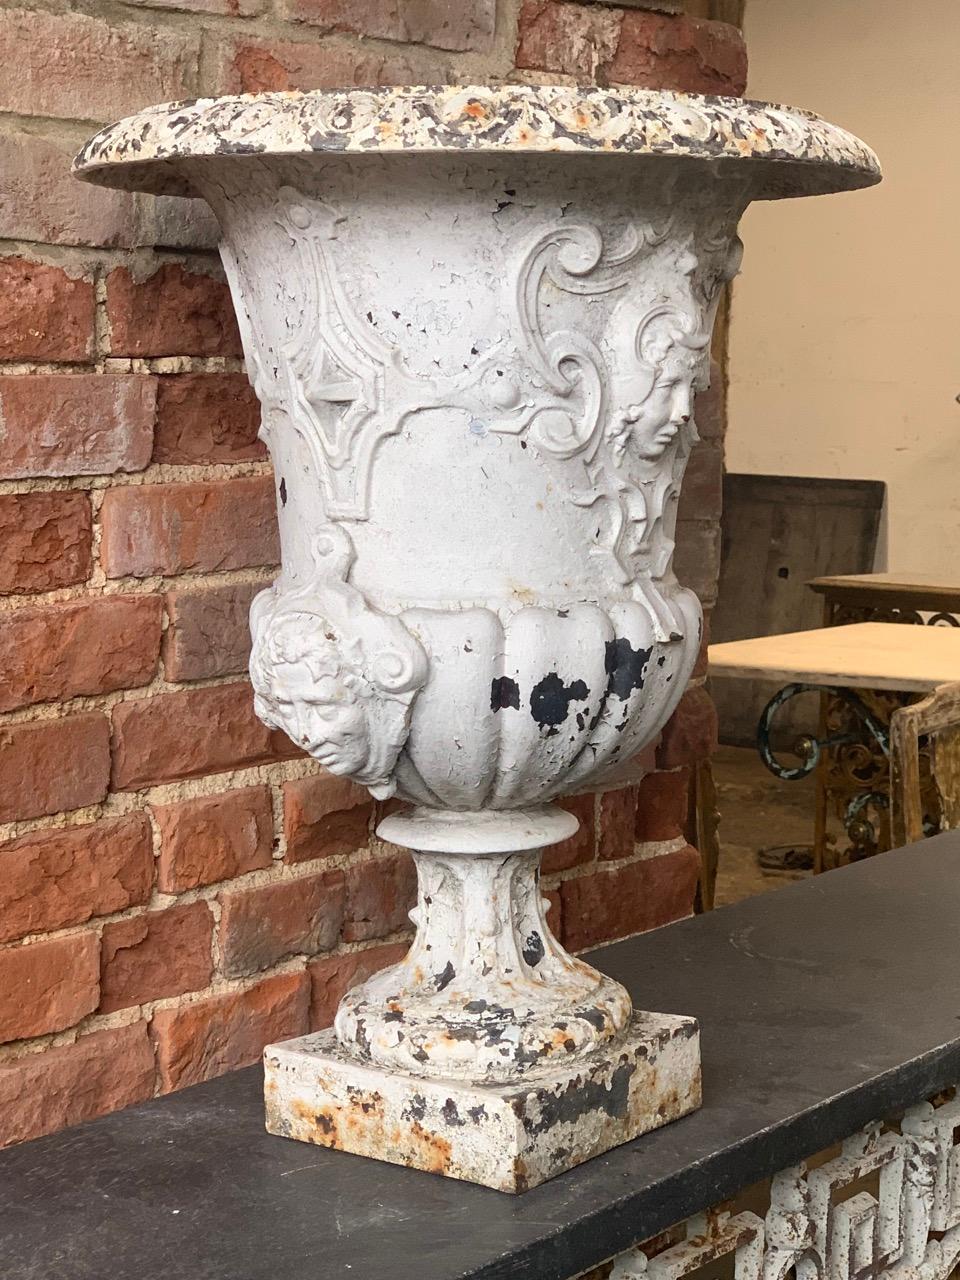 A beautiful 19th century French cast iron urn from the south of France. It is very nice quality with beautiful decoration including four face masks. 
This could be used indoors as a vase or in the garden as a planter.
Please contact us directly for